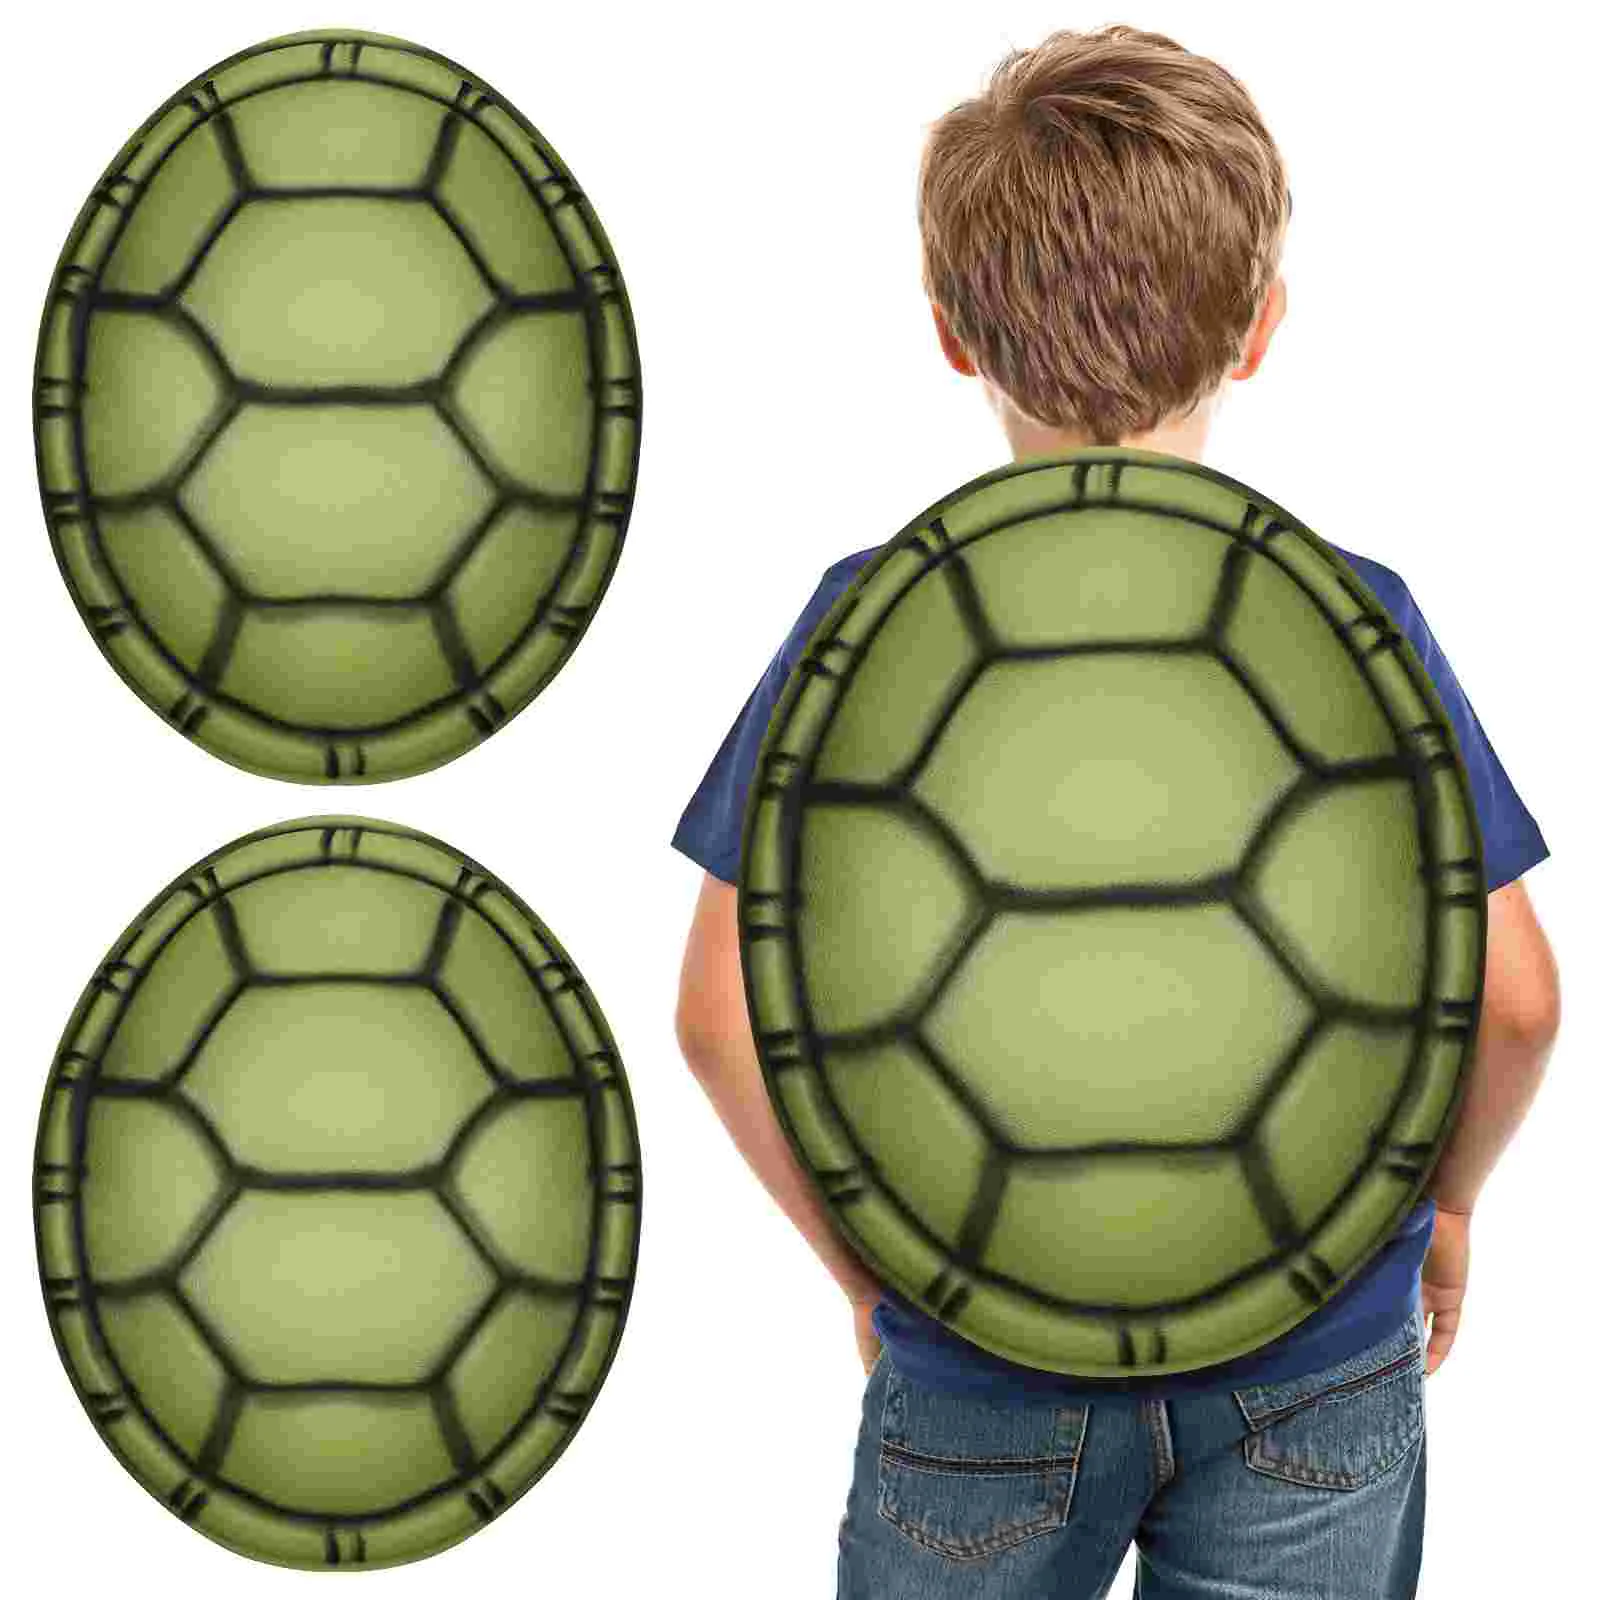 

2 Pcs Turtle Shell Cosplay Tortoise Props Halloween Role Play Party Favors Costumes Accessories Ninja